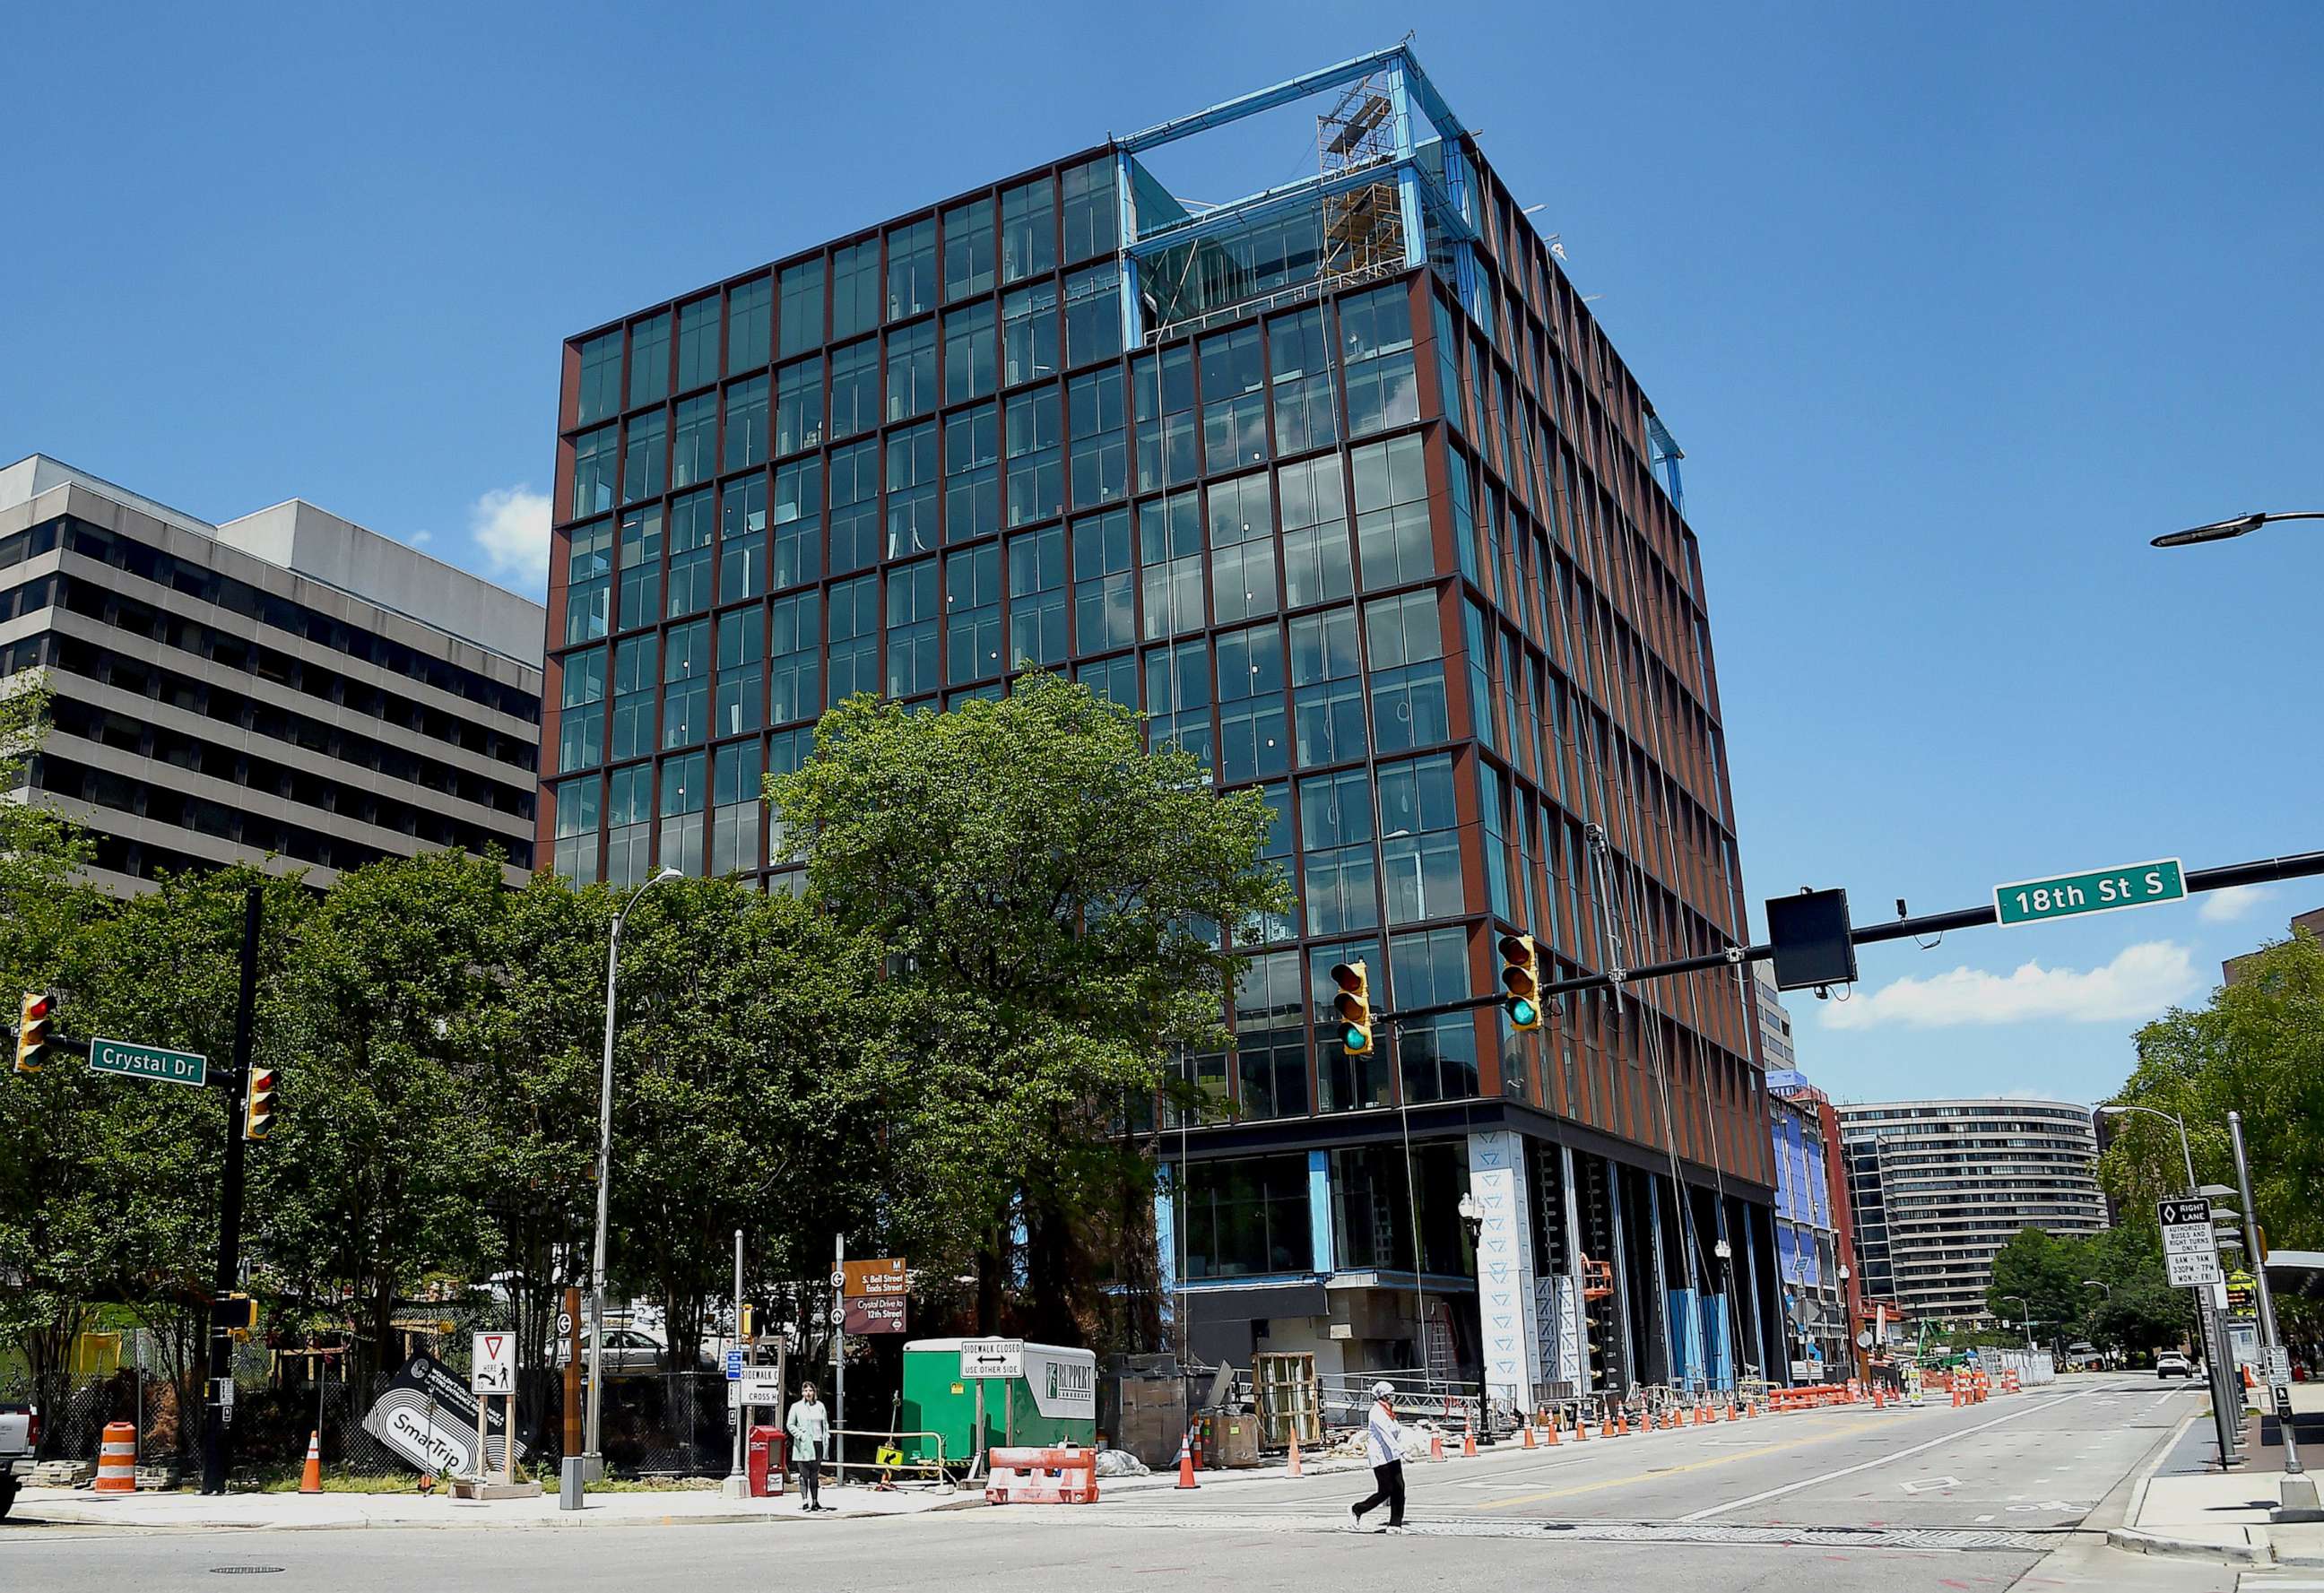 PHOTO: The new headquarters of Amazon, which plans to create 25,000 new jobs, is under construction in the Crystal City neighborhood of Arlington, Virginia, on May 13, 2020.